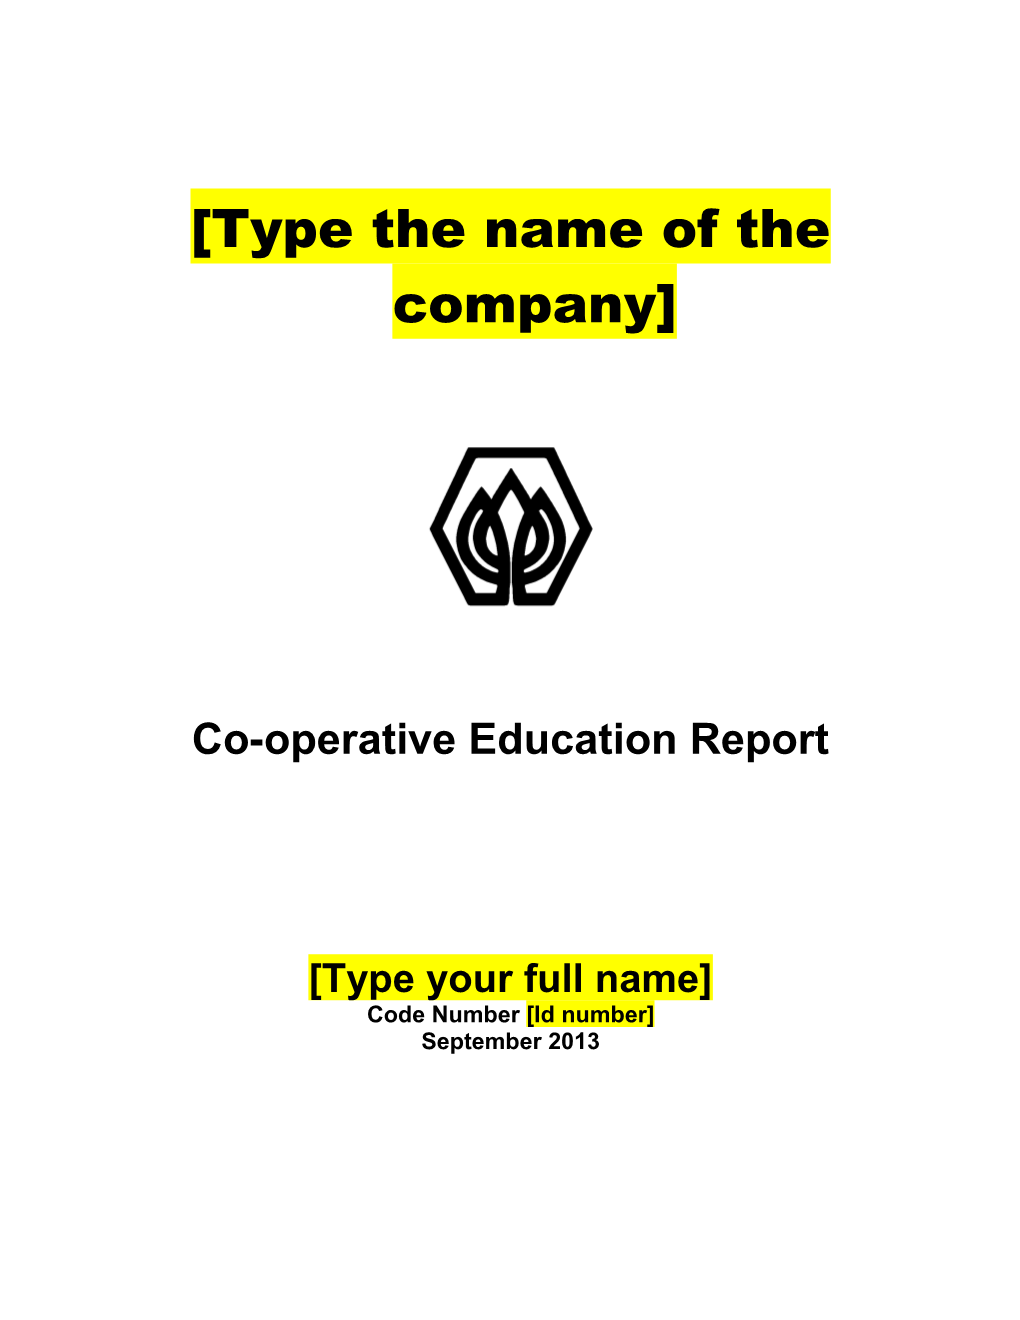 Type the Name of the Company